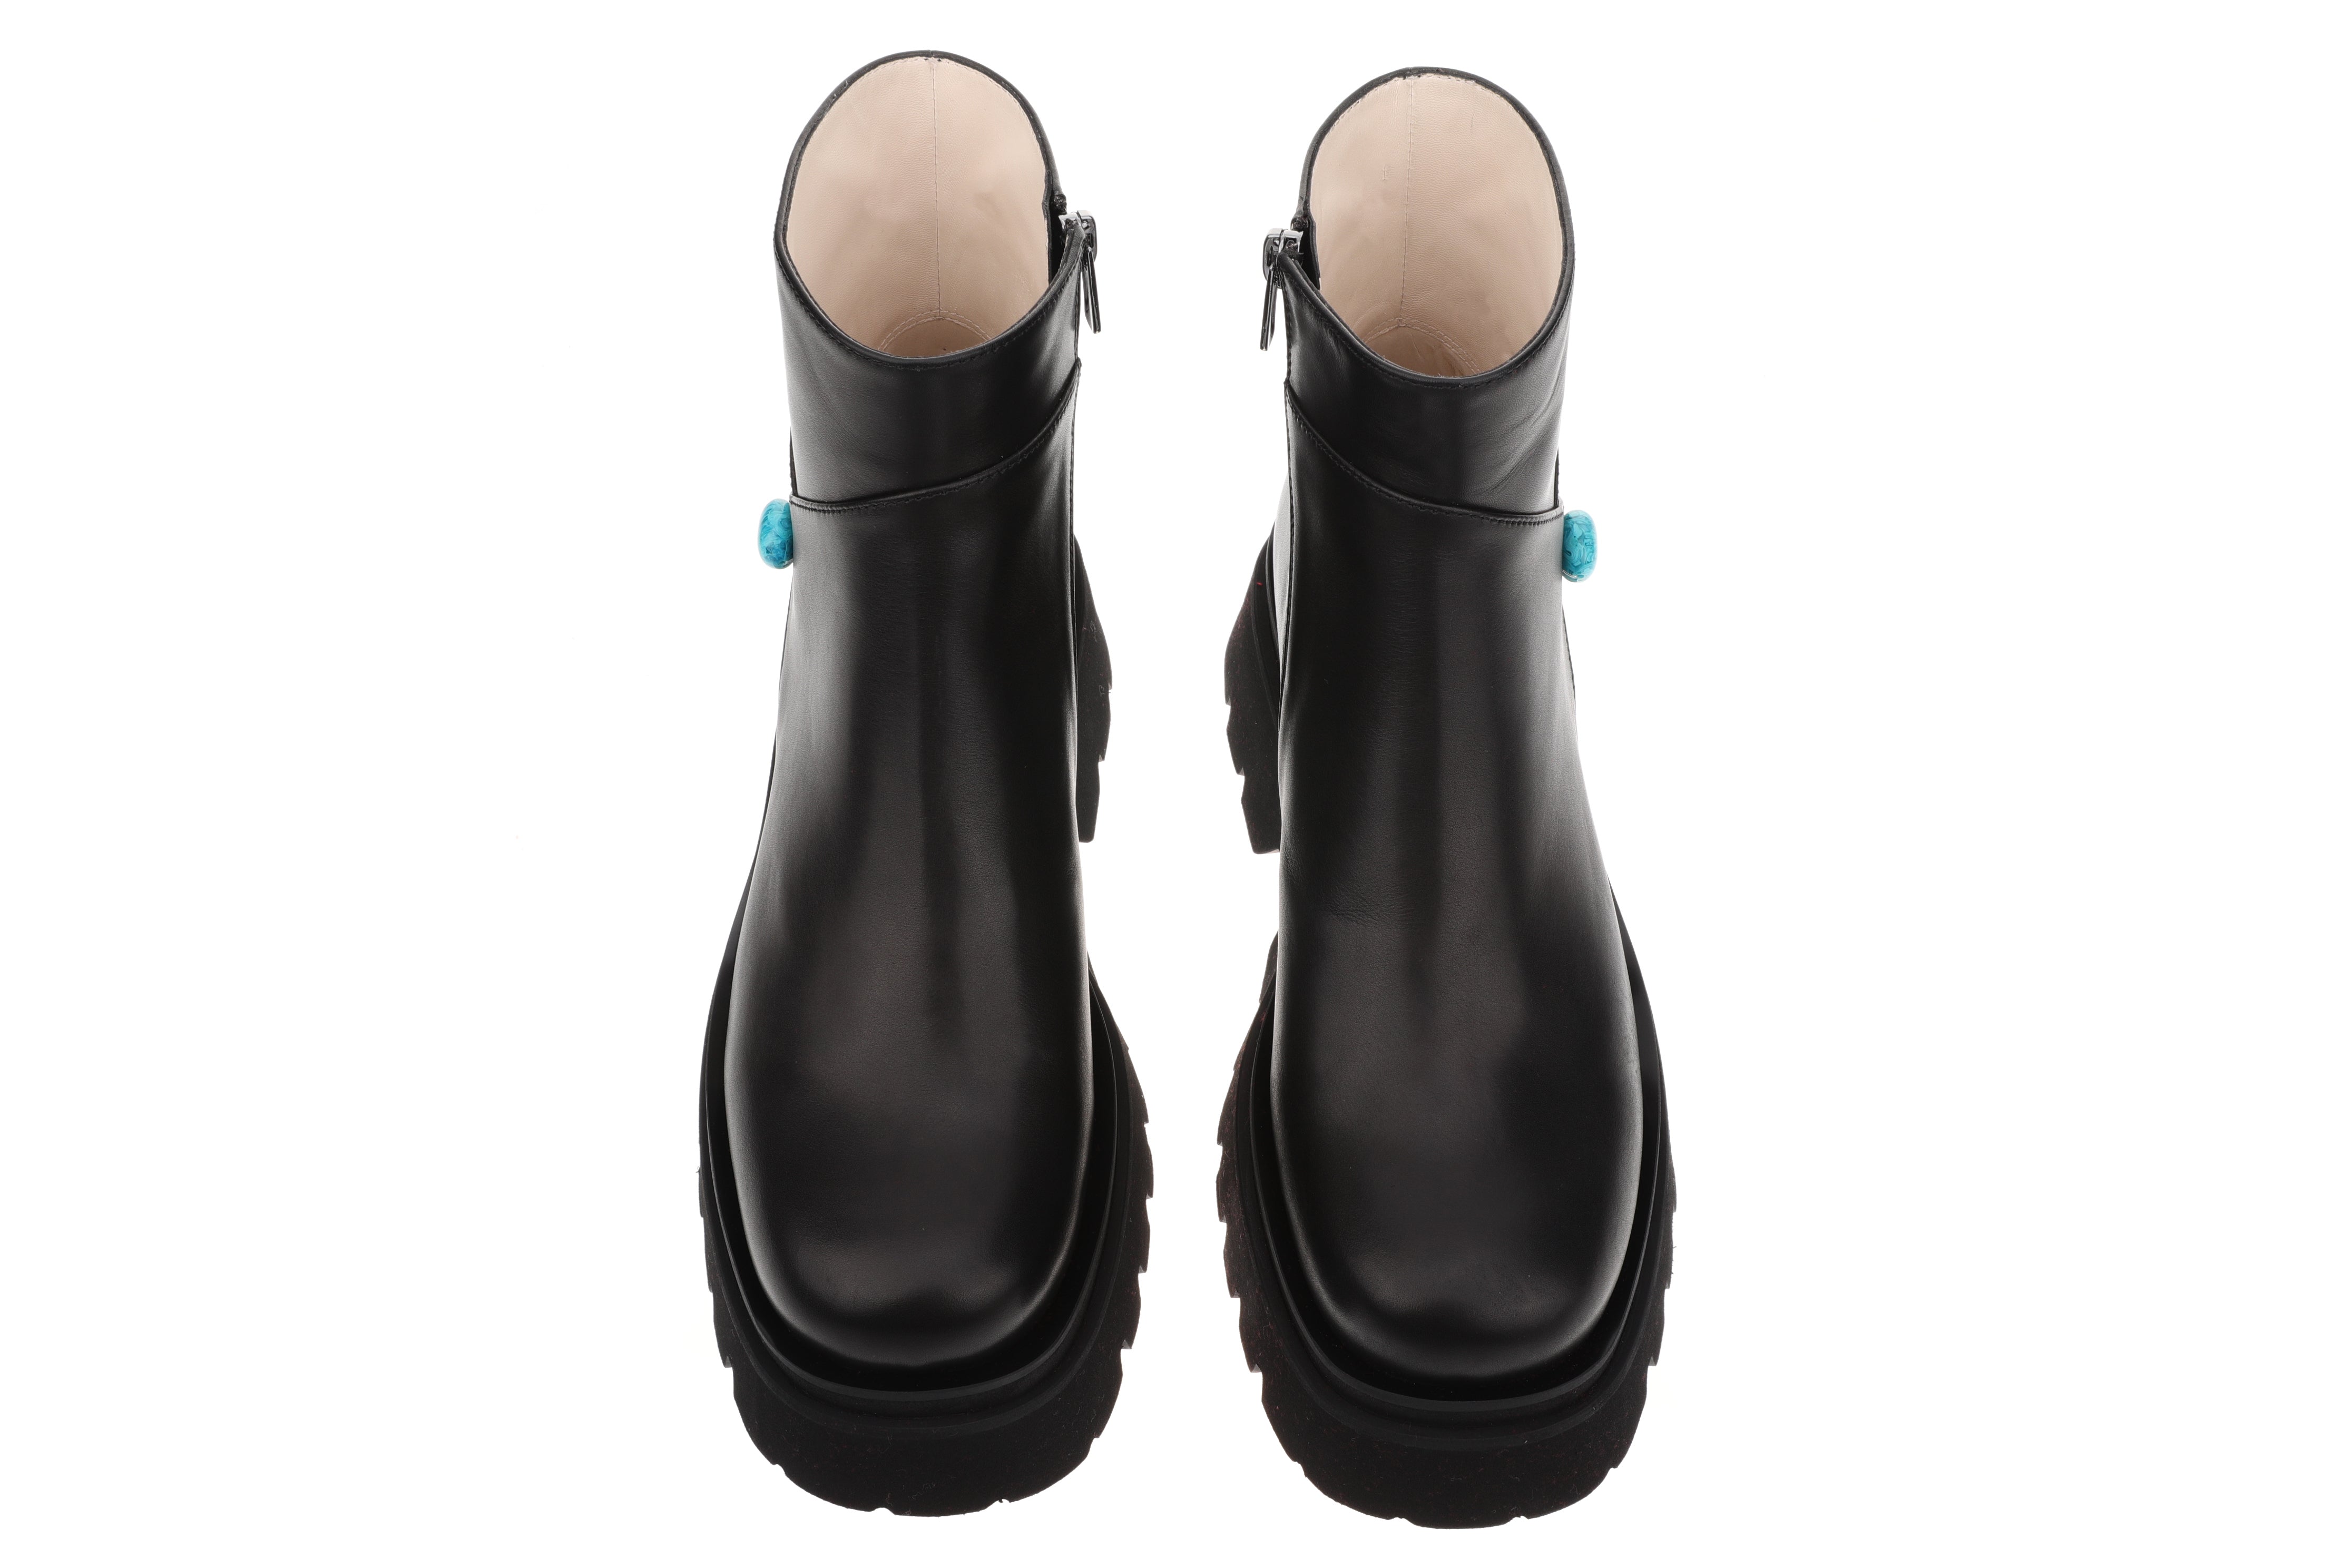 Women's cowhide turquoise equestrian boots